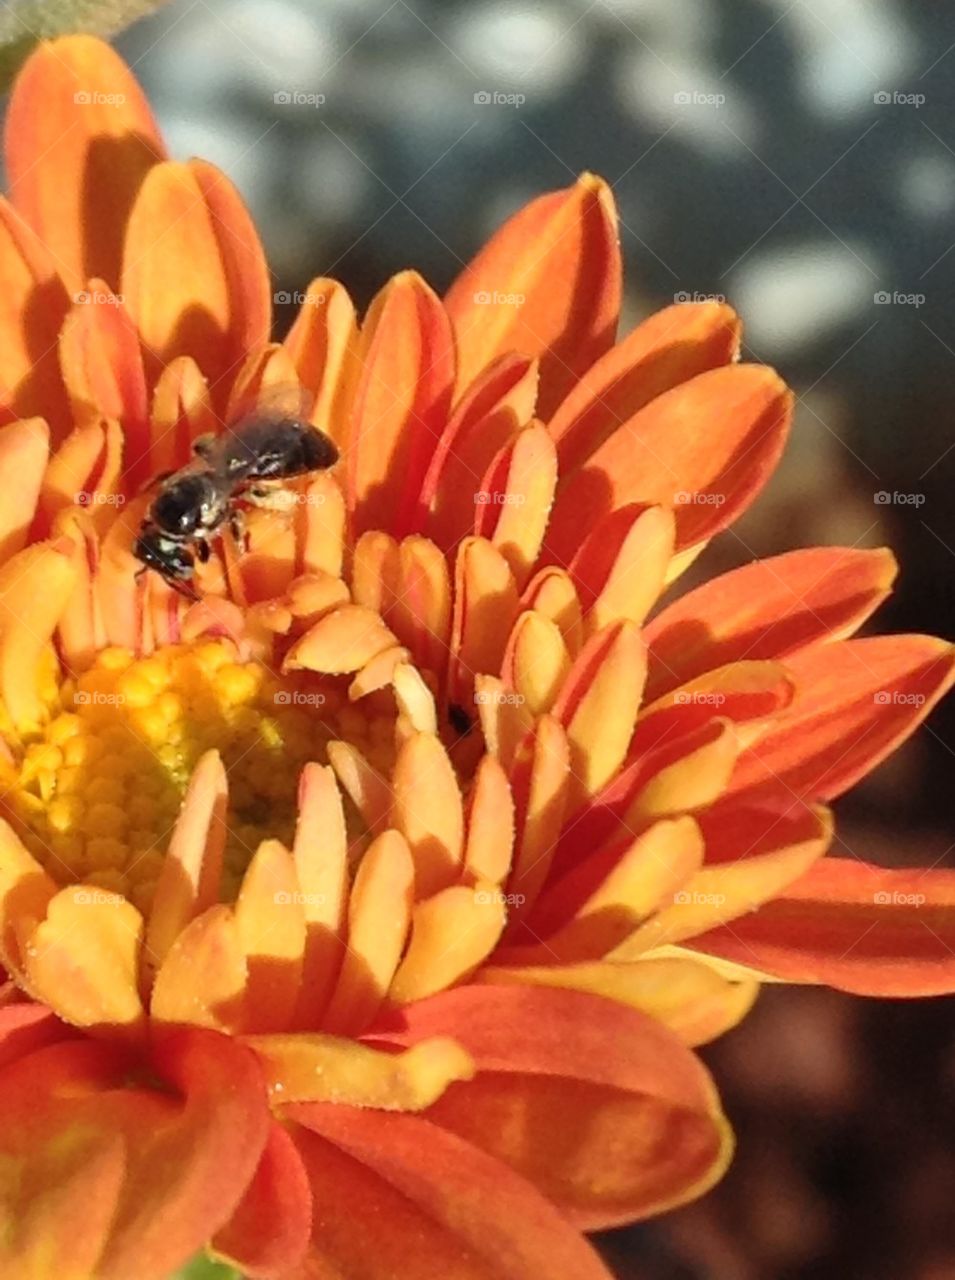 Bee steals from flower